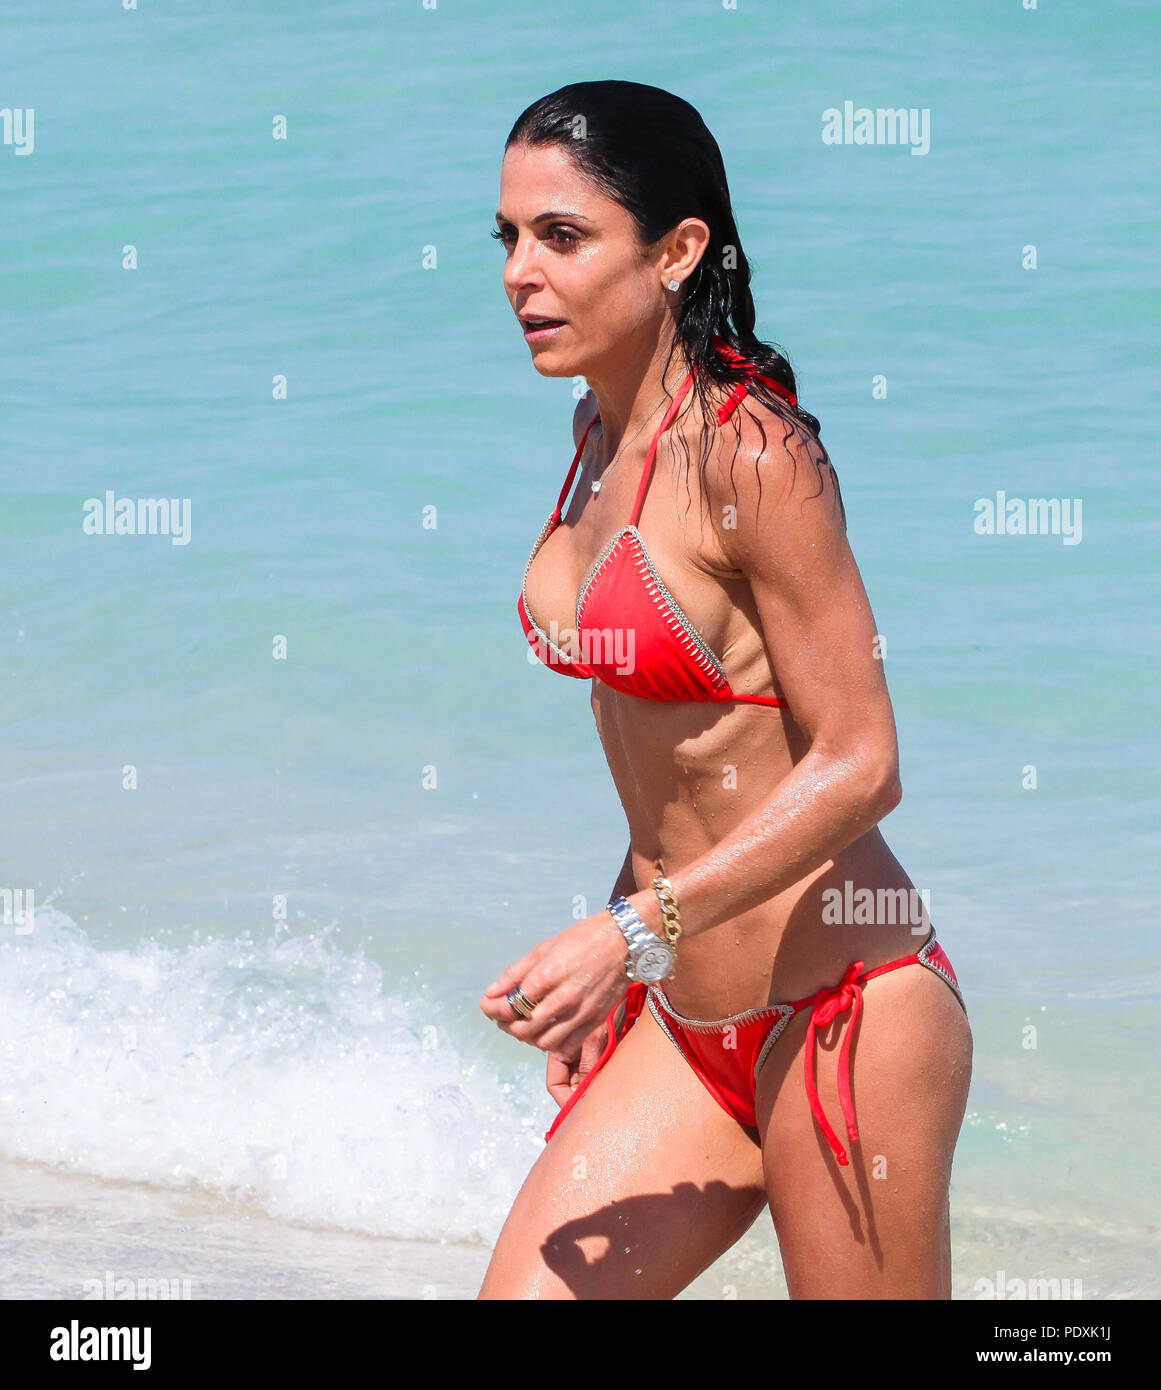 MIAMI BEACH, FL - MARCH 31: The Real Housewives of New York star Bethenny  Frankel look skinny